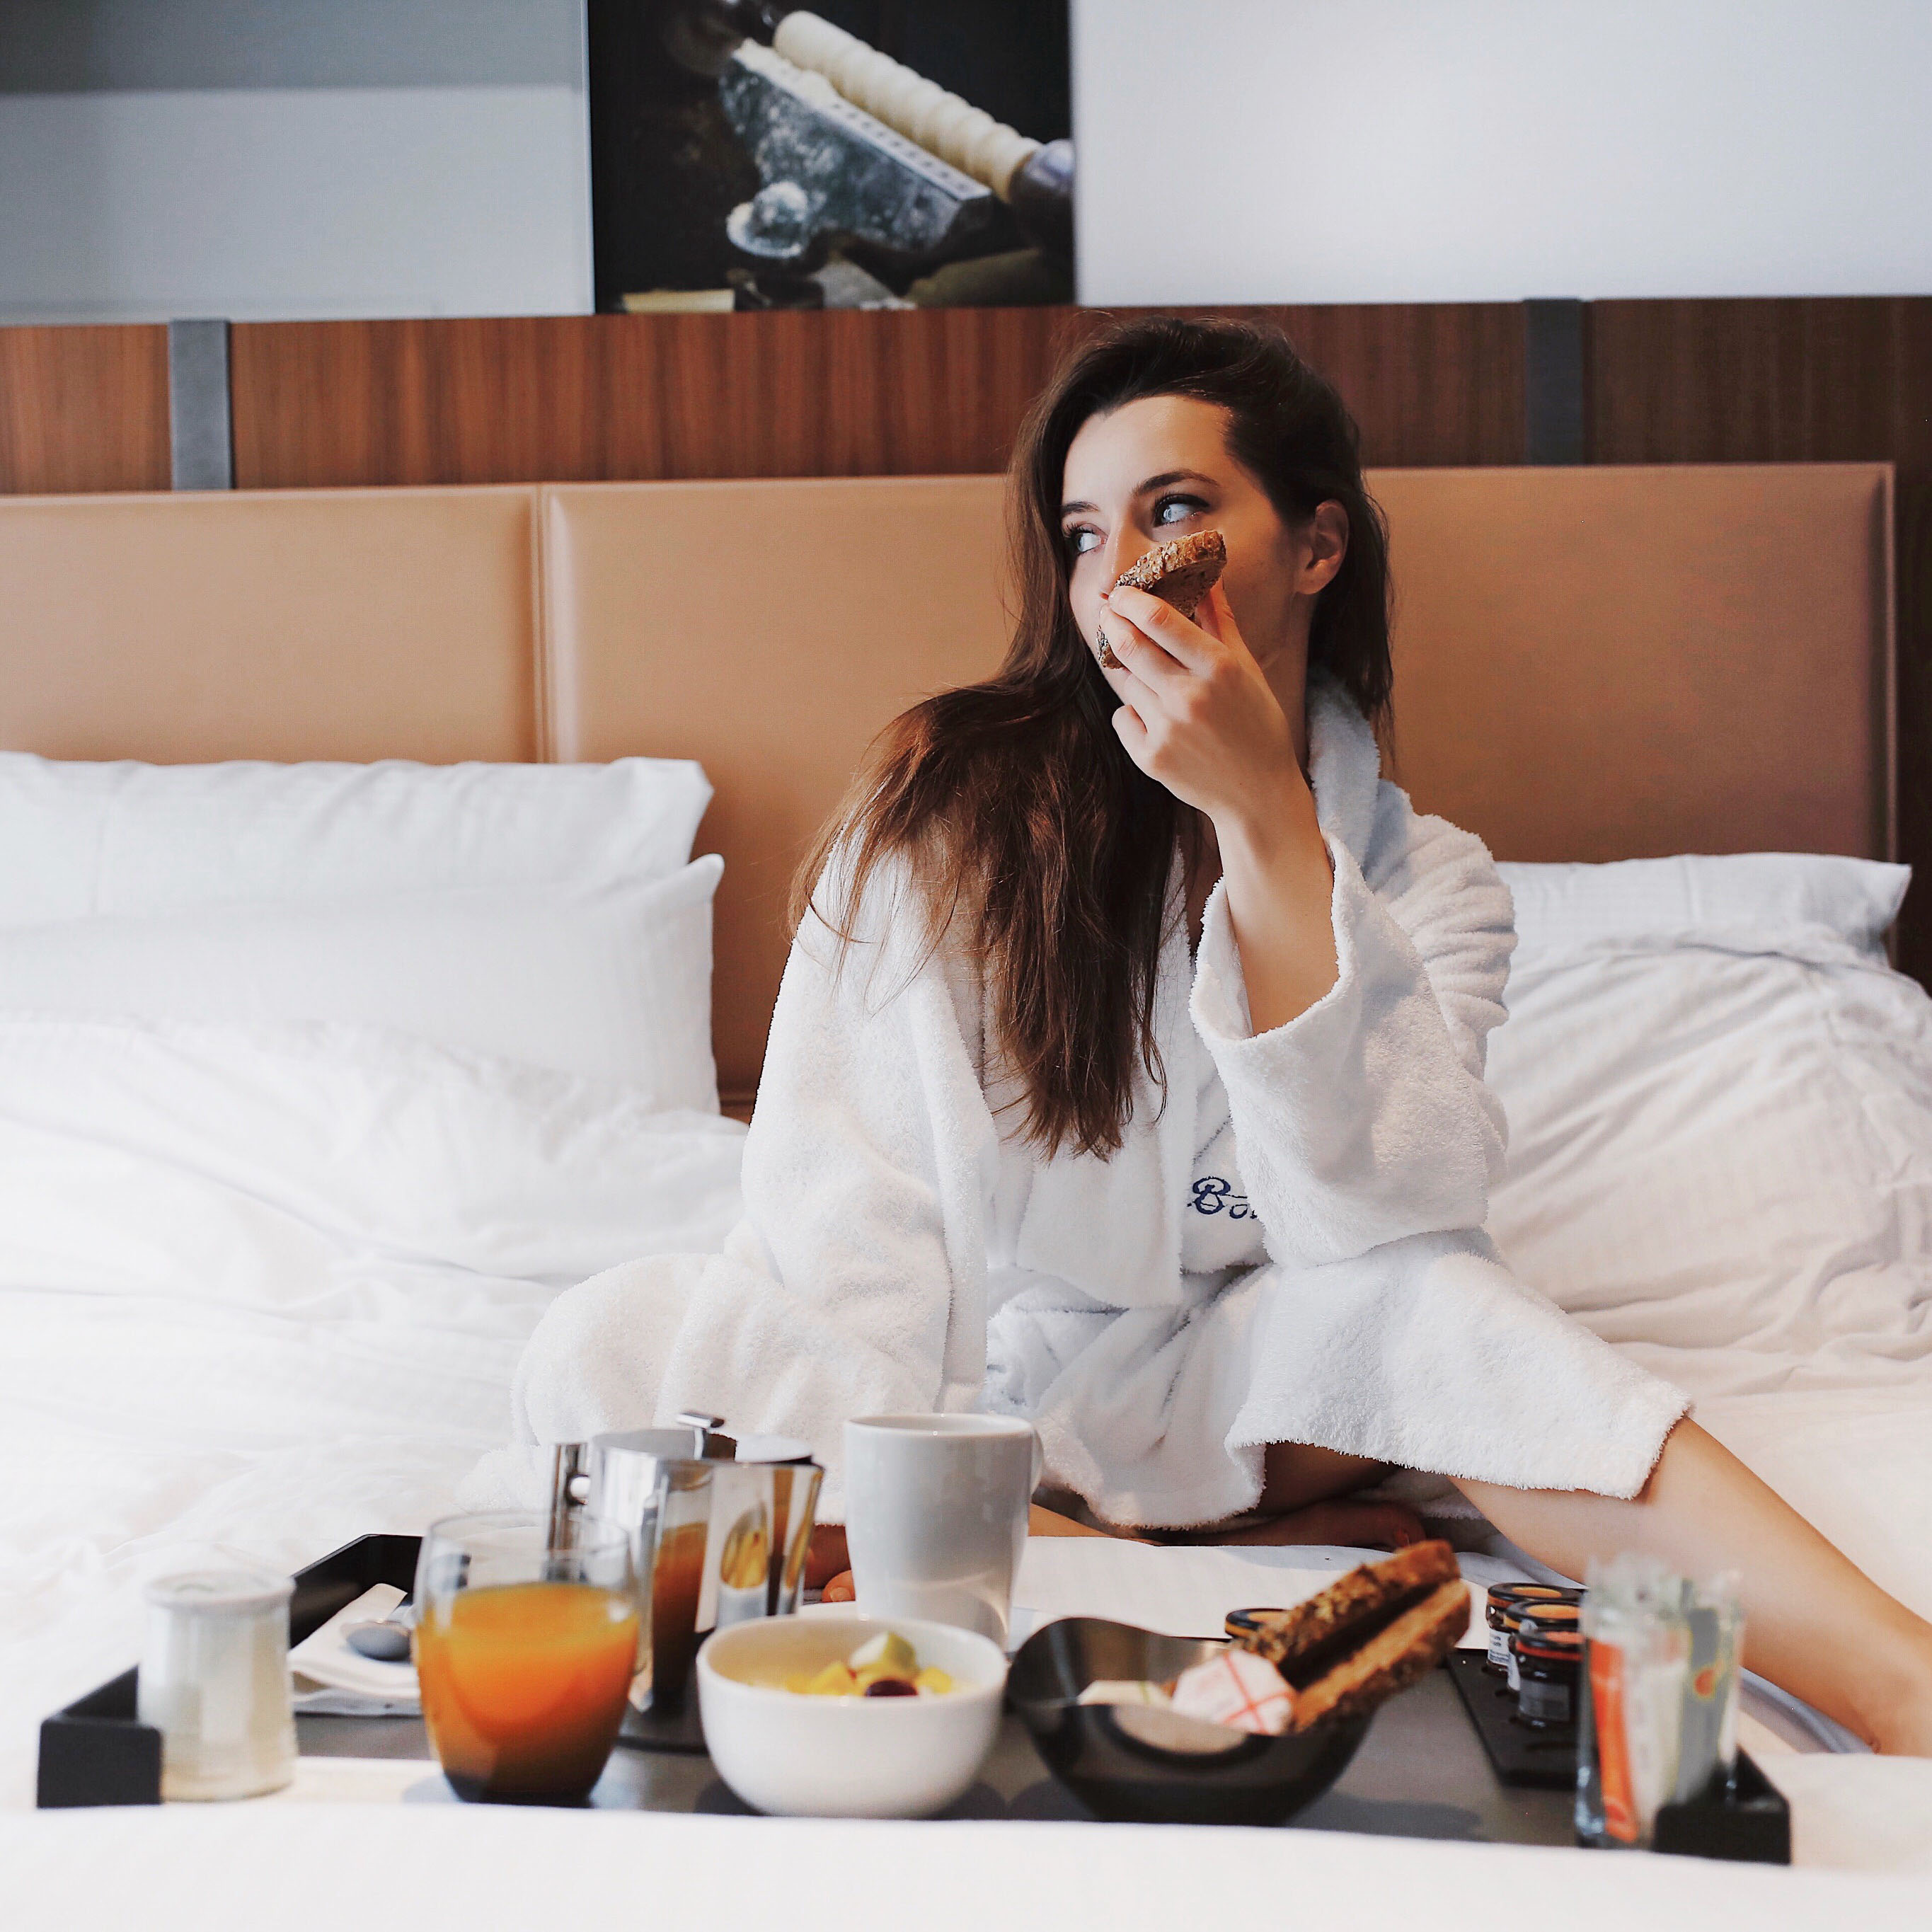 Breakfast in bed at Hotel Boutet - Best shopping addresses in Paris by a fashion blogger - where to shop in Paris _ Paris Le Marais and Haut Marais - Where to stay in Paris: Luxury Hotel Le Boutet